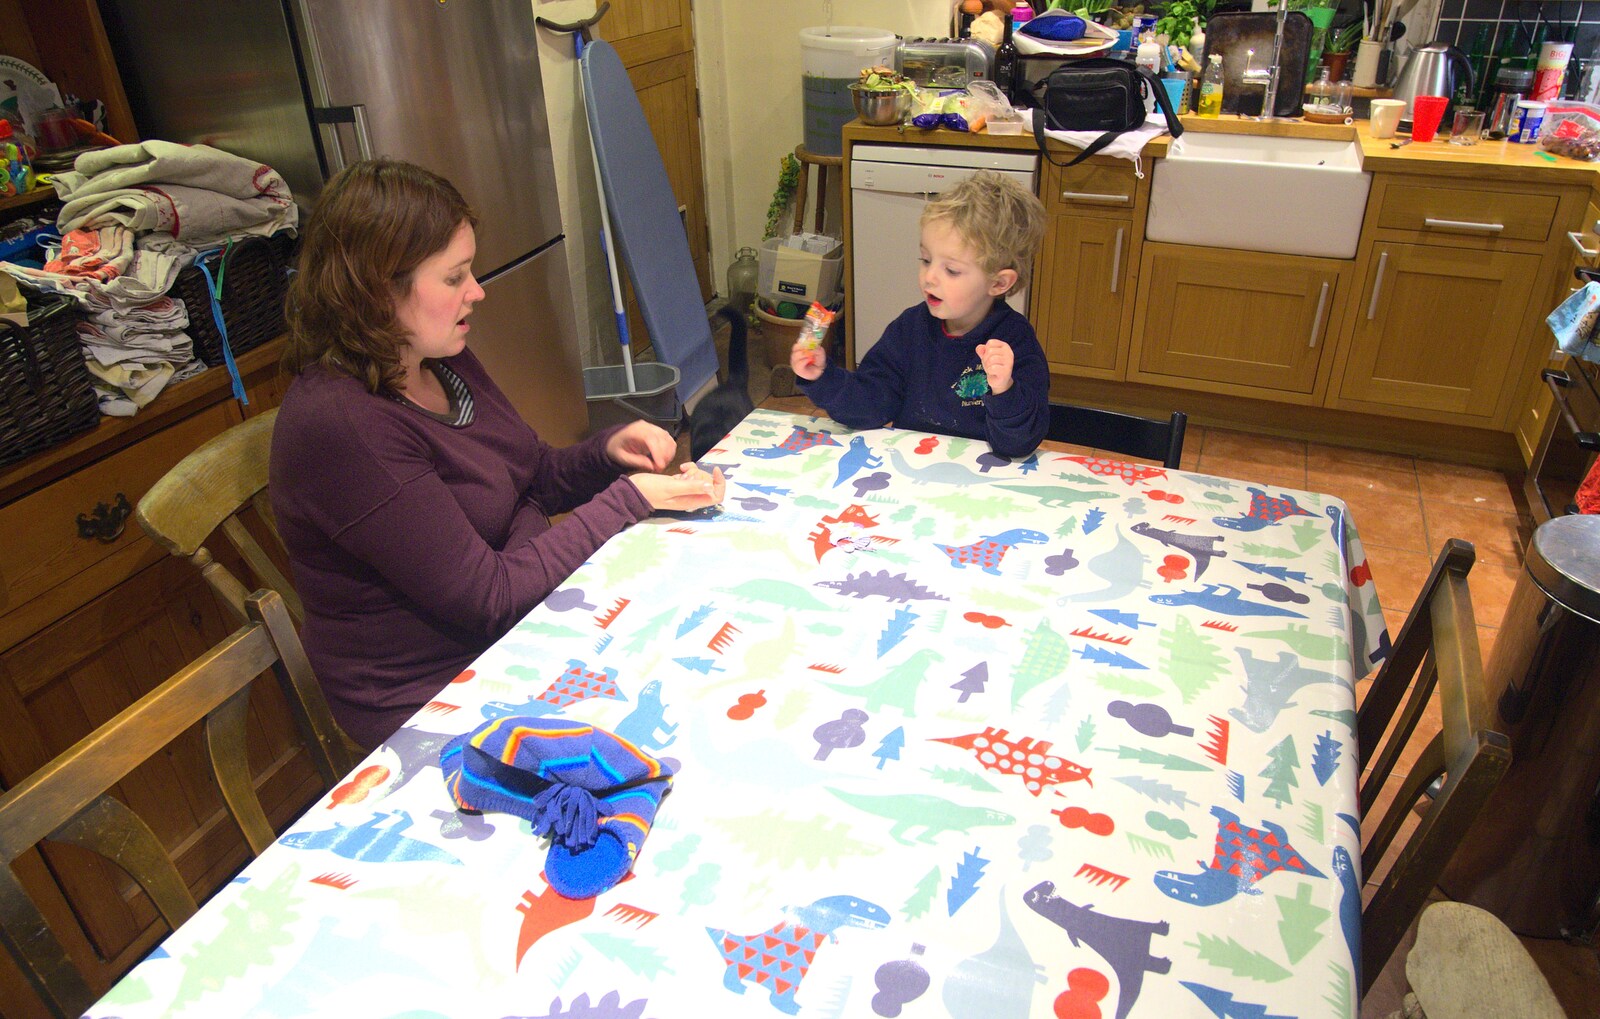 Our new John Lewis Dinosaur tablecloth from Trips to Banham Zoo and Norwich, Norfolk - 2nd January 2012